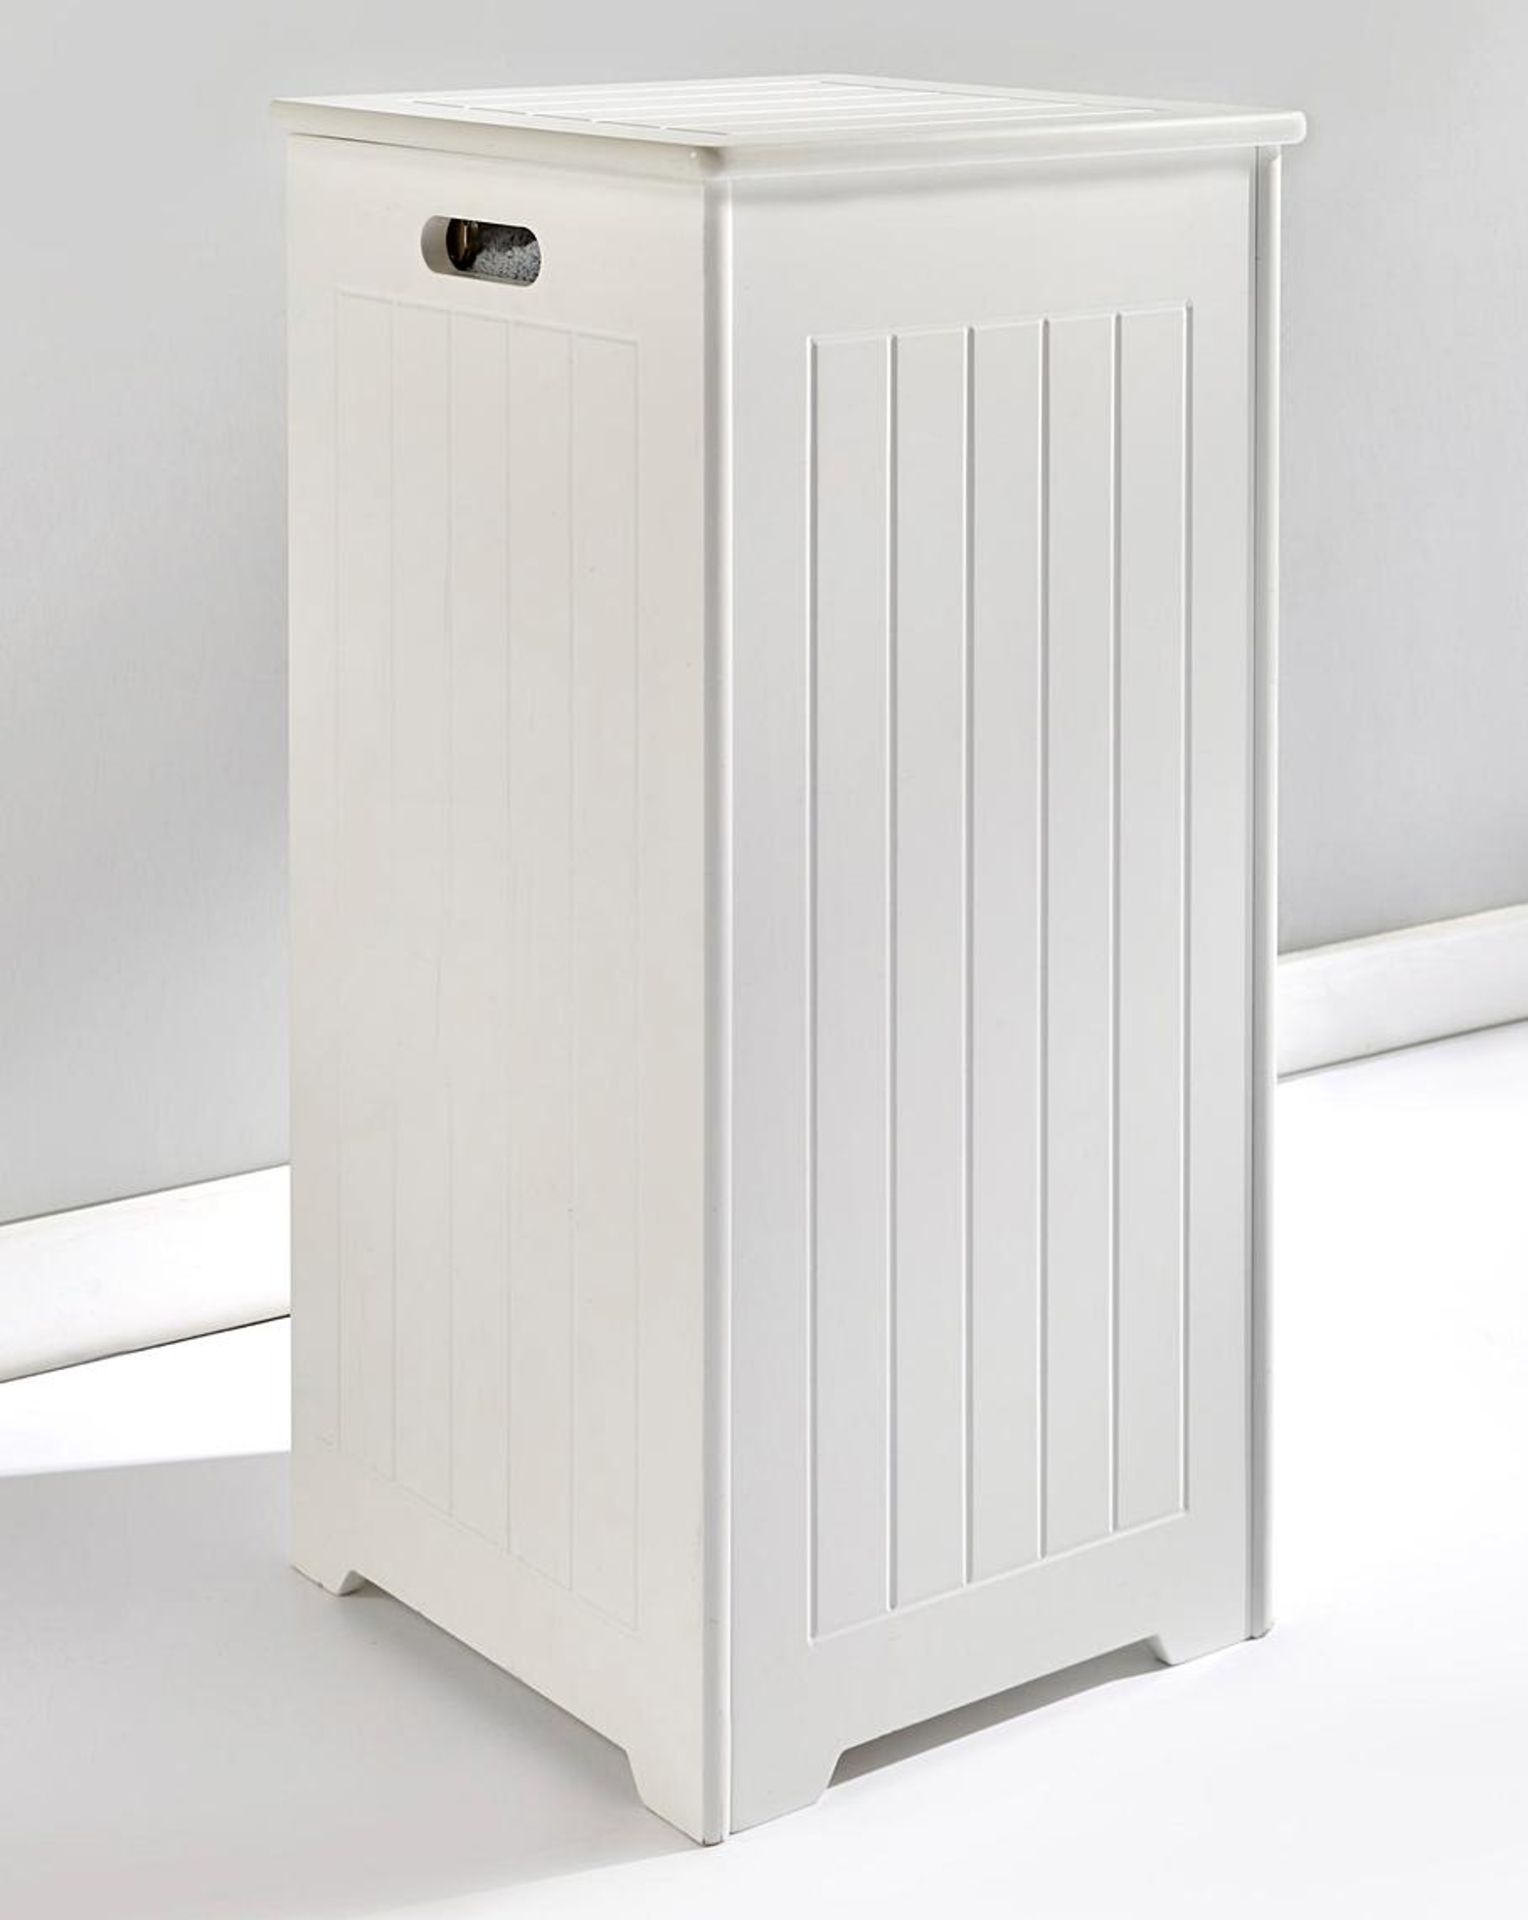 New England Slimline Laundry Hamper. - SR4. Clean, pretty and boasting a gorgeous country style,